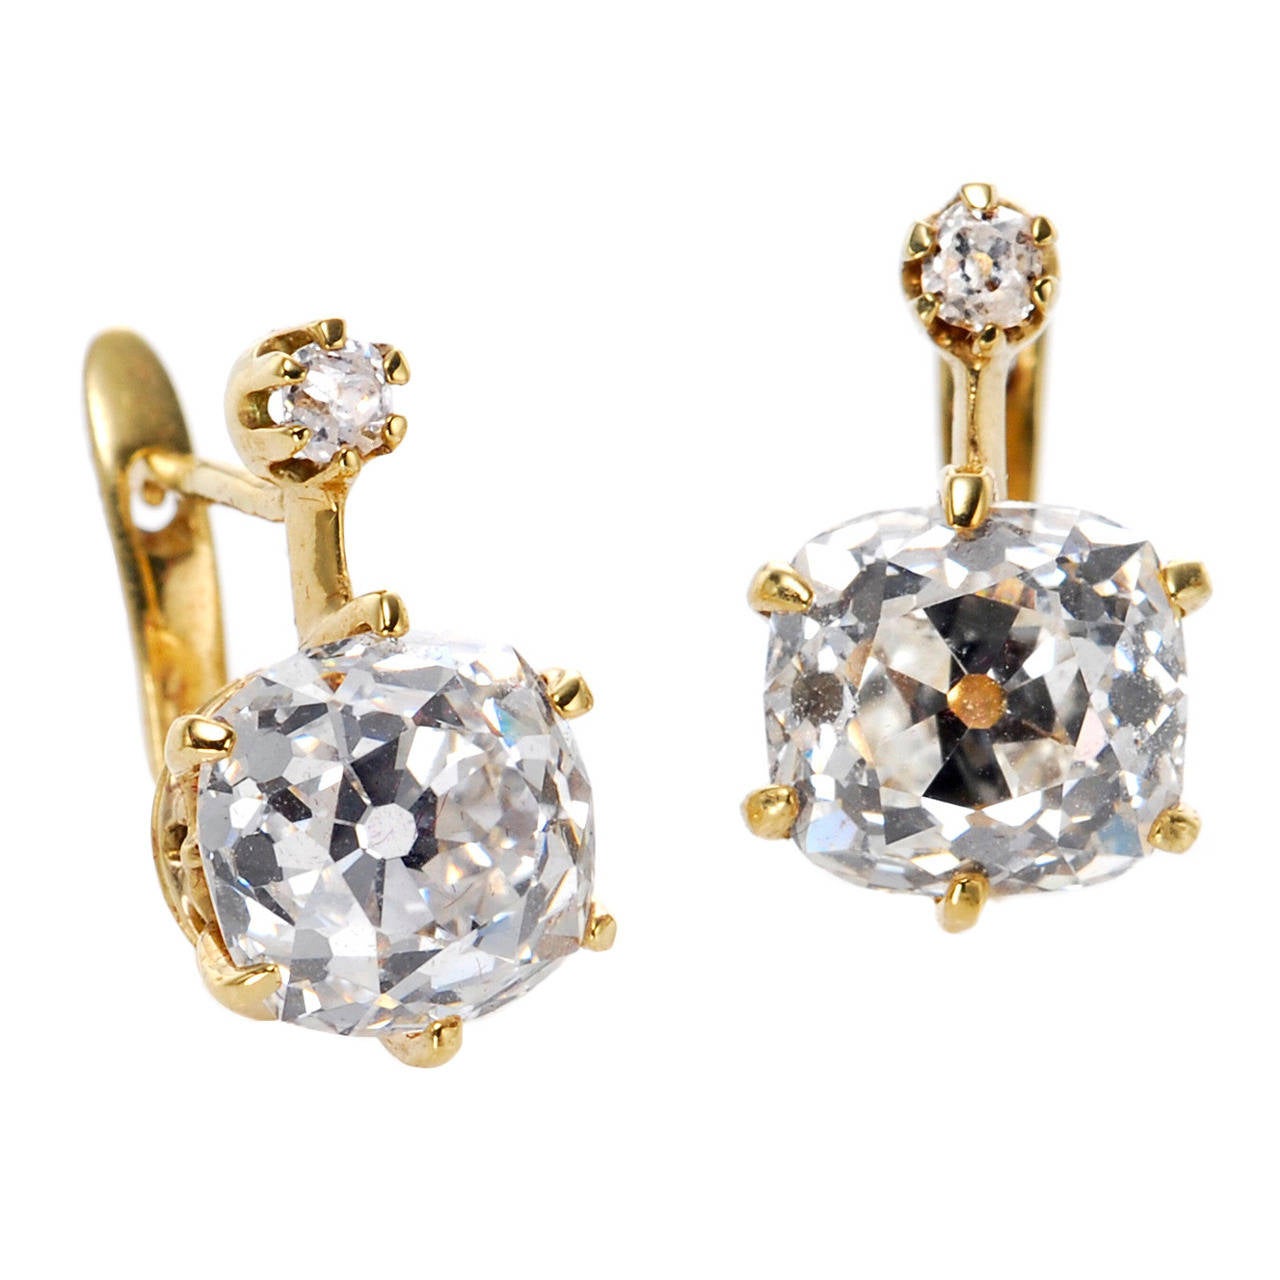 Antique 5.6 Carats Old Mine Cut Diamond Earrings For Sale at 1stDibs